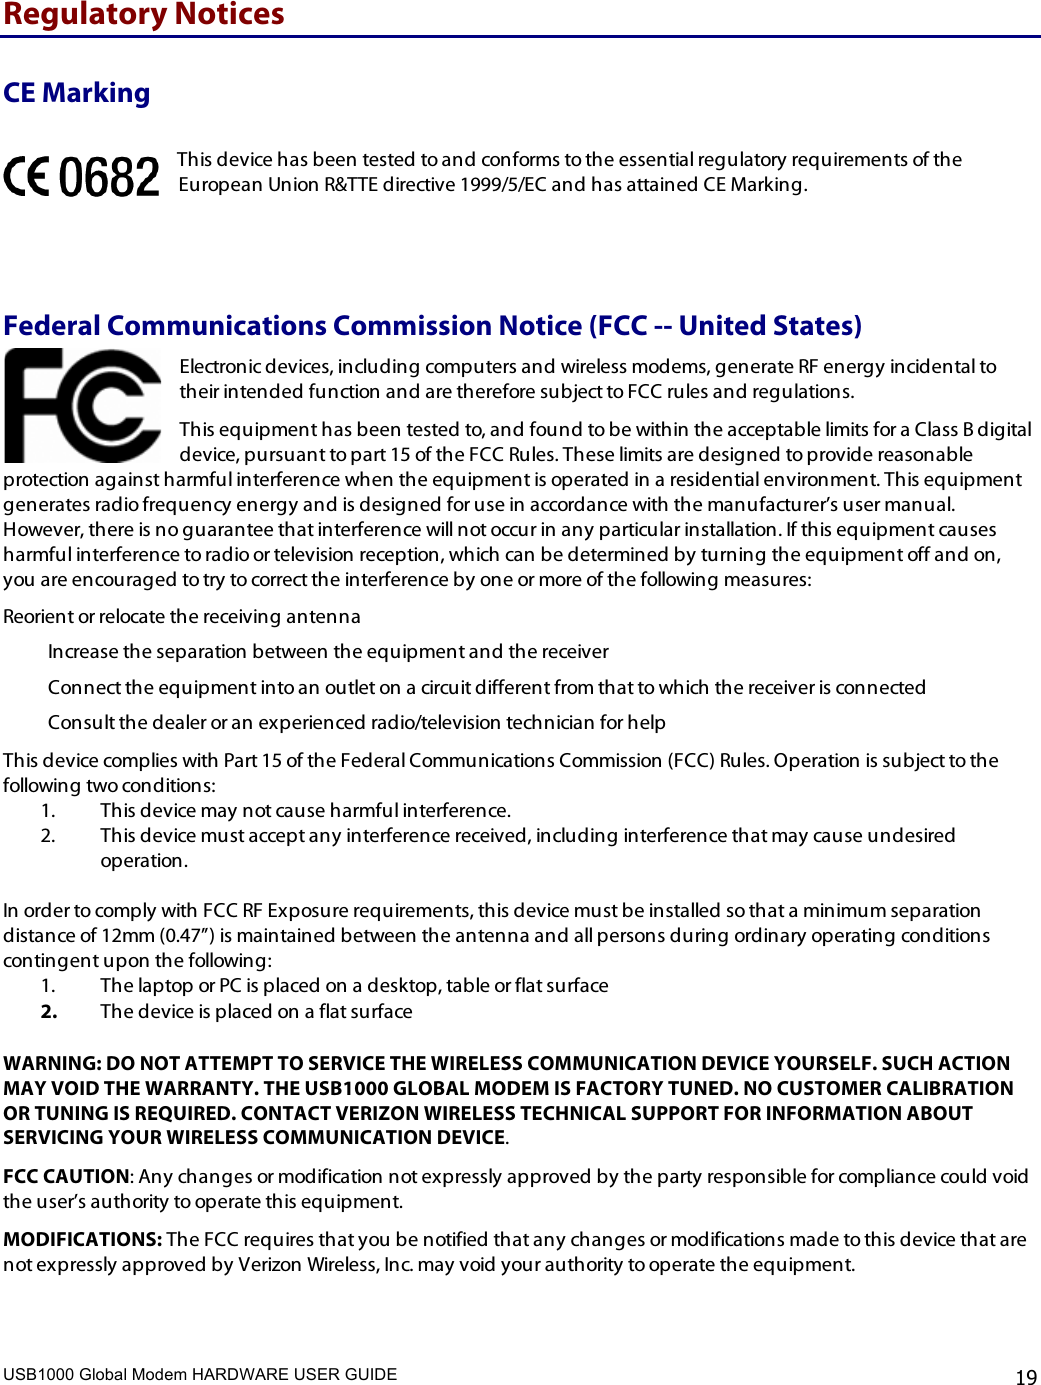 USB1000 Global Modem HARDWARE USER GUIDE    19 Regulatory Notices CE Marking This device has been tested to and conforms to the essential regulatory requirements of the European Union R&amp;TTE directive 1999/5/EC and has attained CE Marking.  Federal Communications Commission Notice (FCC -- United States) Electronic devices, including computers and wireless modems, generate RF energy incidental to their intended function and are therefore subject to FCC rules and regulations.  This equipment has been tested to, and found to be within the acceptable limits for a Class B digital device, pursuant to part 15 of the FCC Rules. These limits are designed to provide reasonable protection against harmful interference when the equipment is operated in a residential environment. This equipment generates radio frequency energy and is designed for use in accordance with the manufacturer’s user manual. However, there is no guarantee that interference will not occur in any particular installation. If this equipment causes harmful interference to radio or television reception, which can be determined by turning the equipment off and on, you are encouraged to try to correct the interference by one or more of the following measures:  Reorient or relocate the receiving antenna  Increase the separation between the equipment and the receiver  Connect the equipment into an outlet on a circuit different from that to which the receiver is connected Consult the dealer or an experienced radio/television technician for help This device complies with Part 15 of the Federal Communications Commission (FCC) Rules. Operation is subject to the following two conditions: 1. This device may not cause harmful interference.  2. This device must accept any interference received, including interference that may cause undesired operation.   In order to comply with FCC RF Exposure requirements, this device must be installed so that a minimum separation distance of 12mm (0.47”) is maintained between the antenna and all persons during ordinary operating conditions contingent upon the following: 1. The laptop or PC is placed on a desktop, table or flat surface 2. The device is placed on a flat surface  WARNING: DO NOT ATTEMPT TO SERVICE THE WIRELESS COMMUNICATION DEVICE YOURSELF. SUCH ACTION MAY VOID THE WARRANTY. THE USB1000 GLOBAL MODEM IS FACTORY TUNED. NO CUSTOMER CALIBRATION OR TUNING IS REQUIRED. CONTACT VERIZON WIRELESS TECHNICAL SUPPORT FOR INFORMATION ABOUT SERVICING YOUR WIRELESS COMMUNICATION DEVICE. FCC CAUTION: Any changes or modification not expressly approved by the party responsible for compliance could void the user’s authority to operate this equipment.  MODIFICATIONS: The FCC requires that you be notified that any changes or modifications made to this device that are not expressly approved by Verizon Wireless, Inc. may void your authority to operate the equipment.  